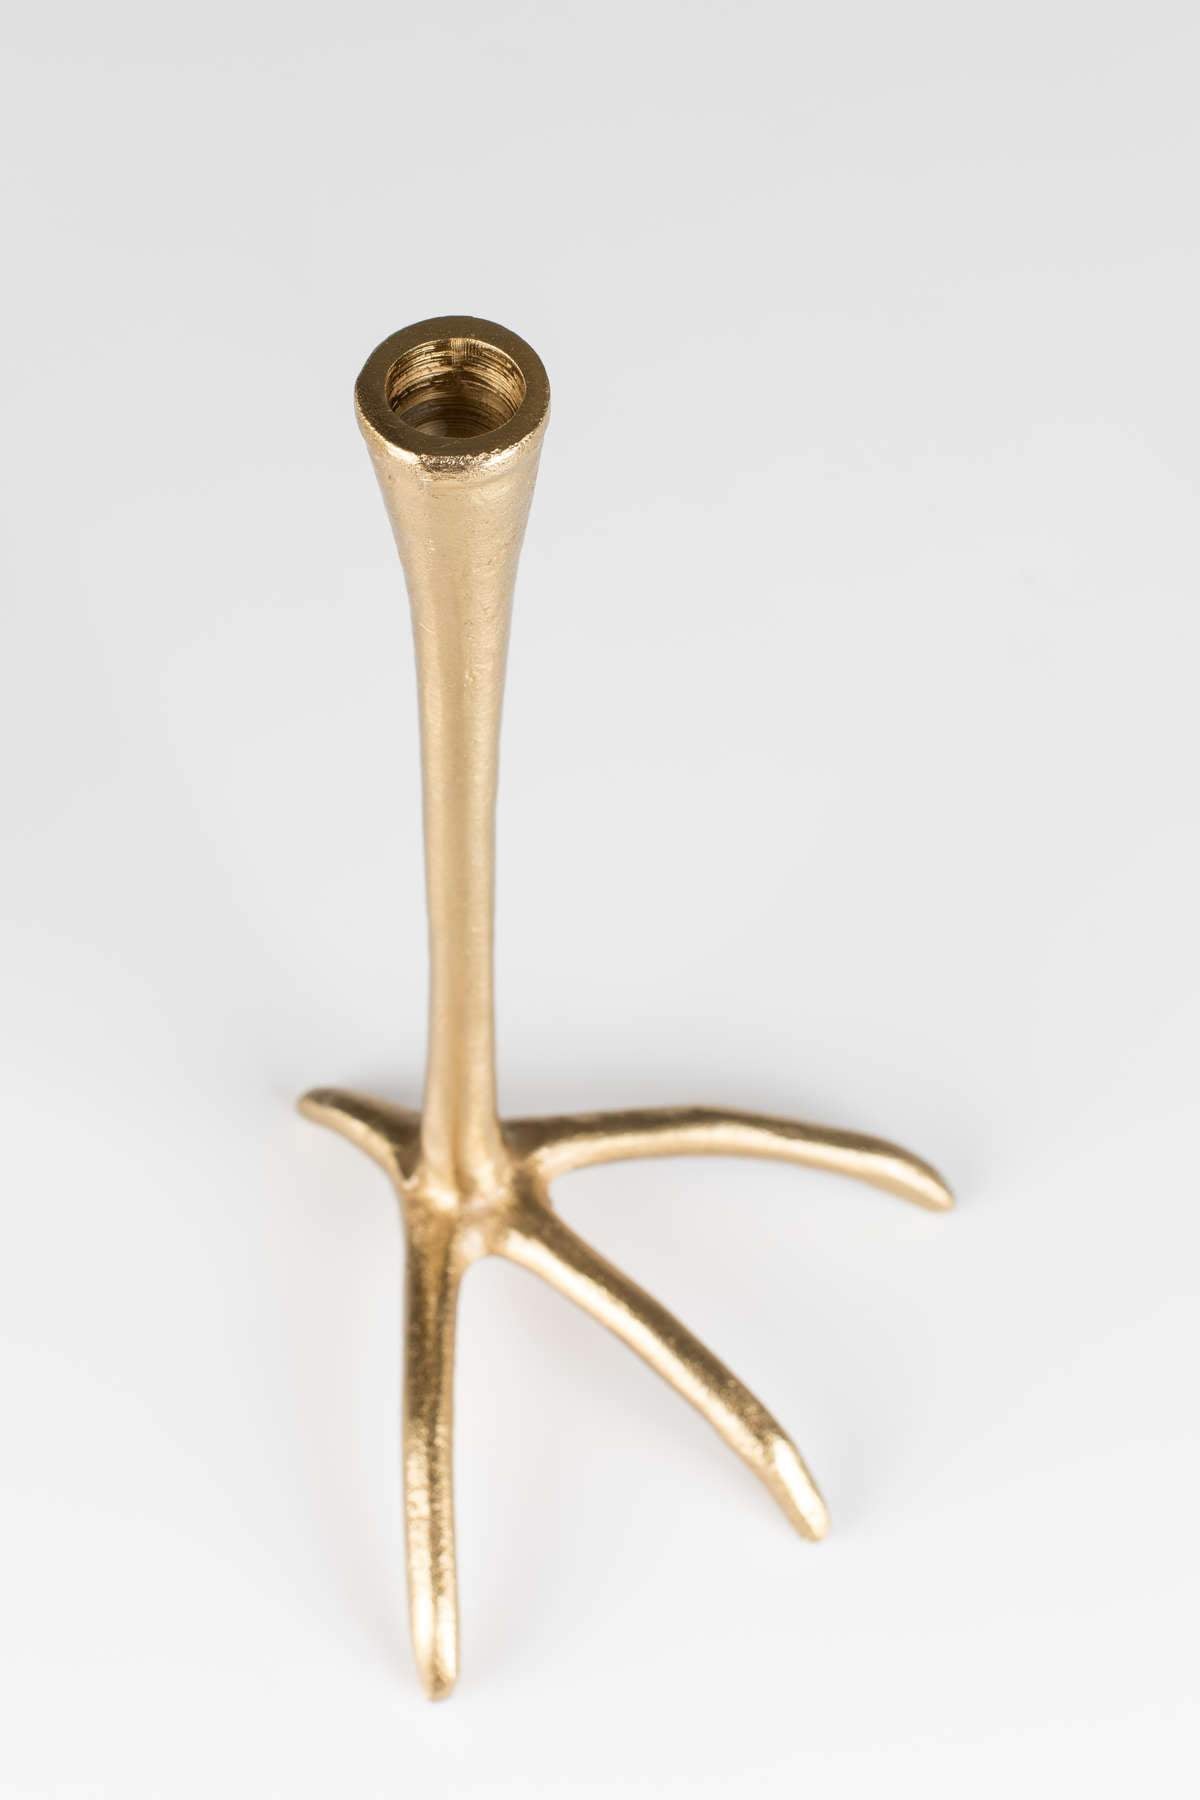 As for the interior design, the candles are almost too penny. But for a reason: an elegant candle holder is one of the simplest interior design hacks. Meet the Bold Monkey's the Golden Heron candlestick: an immediate atmosphere, with a bit of good humor.